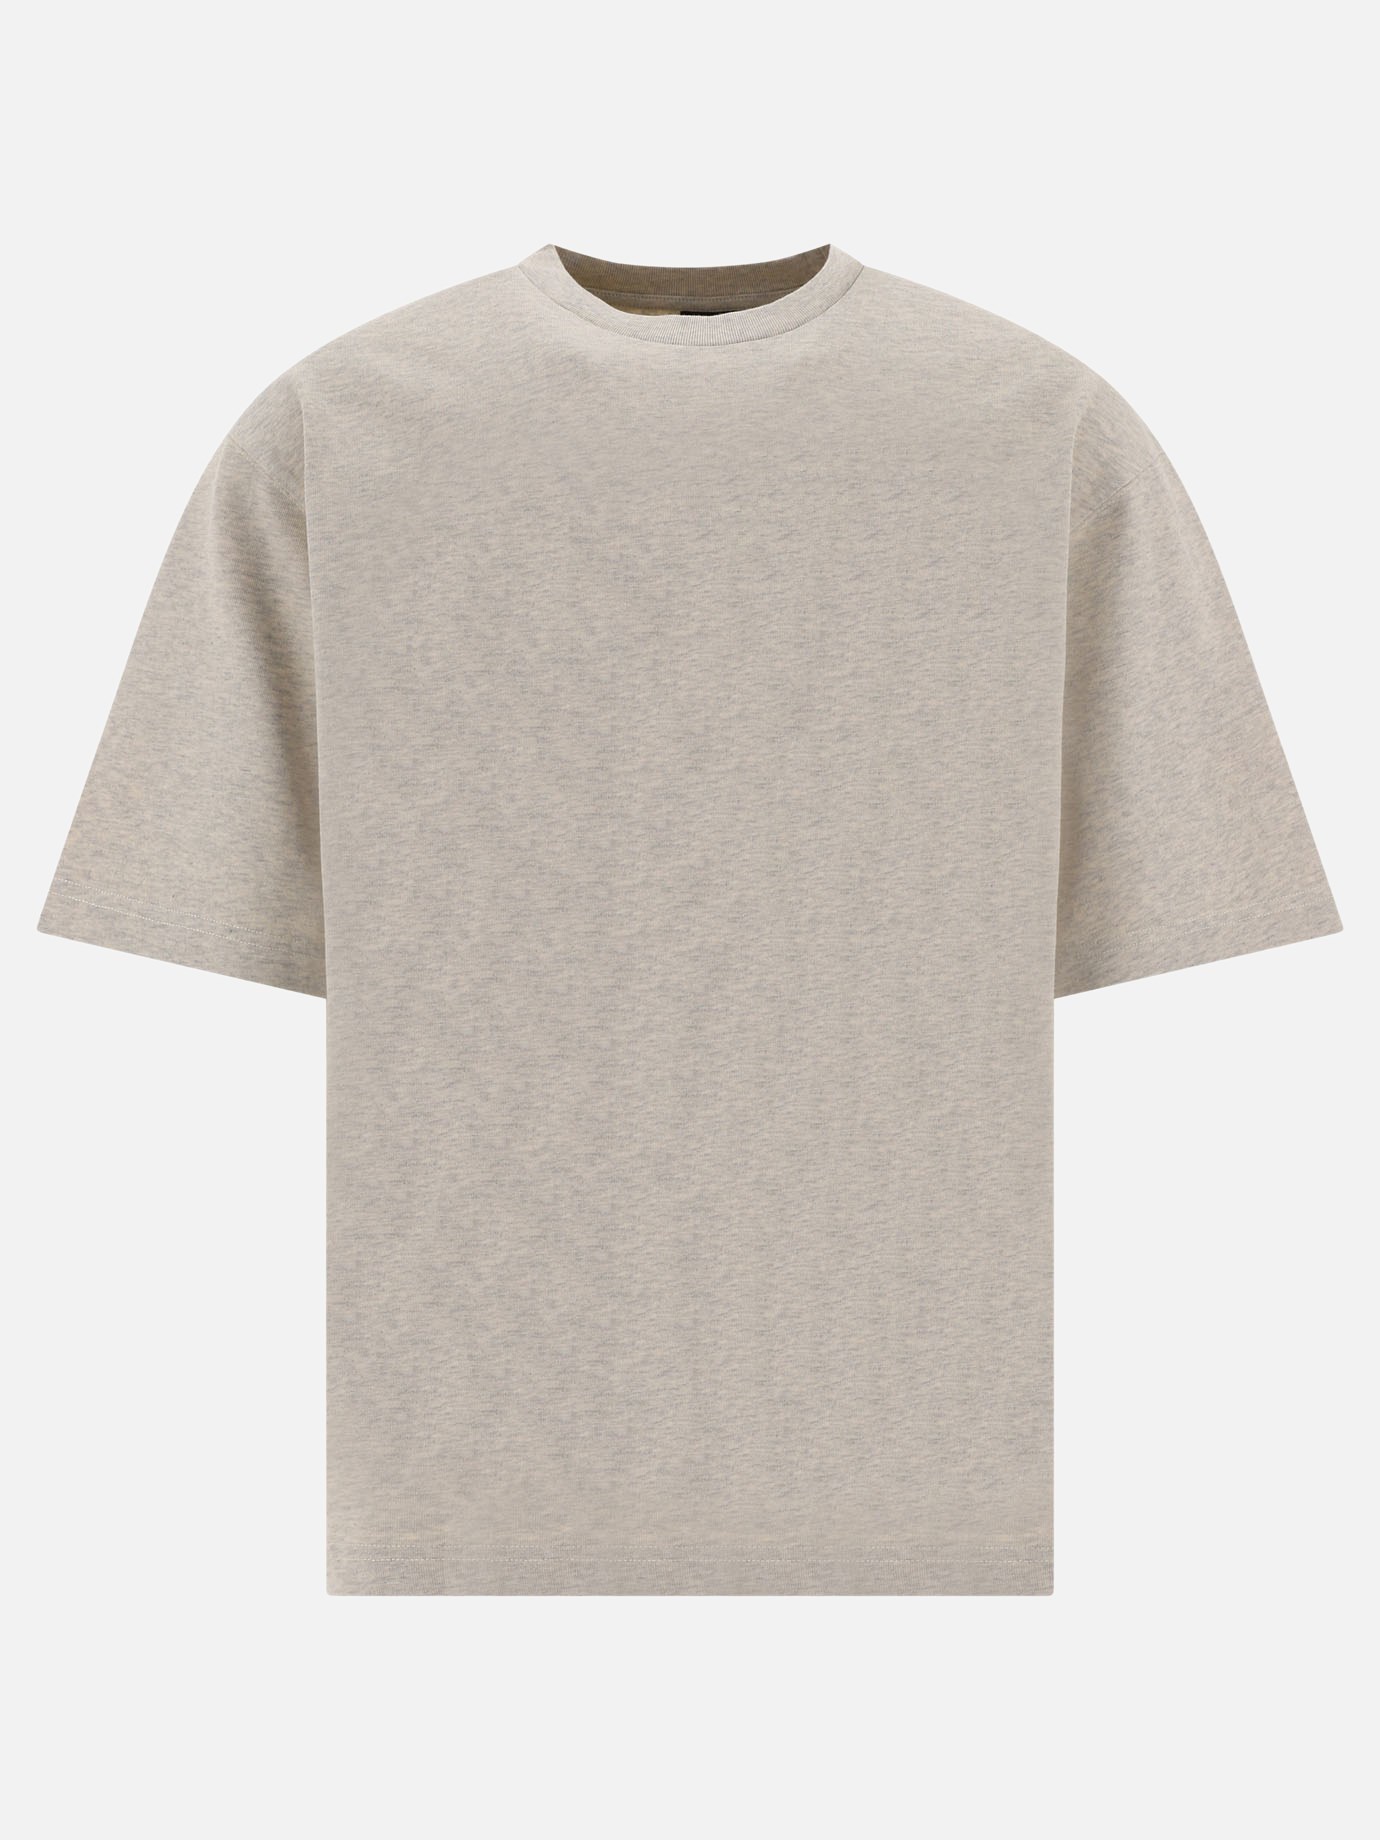 T-shirt  Le T-shirt Crabe by Jacquemus - 2